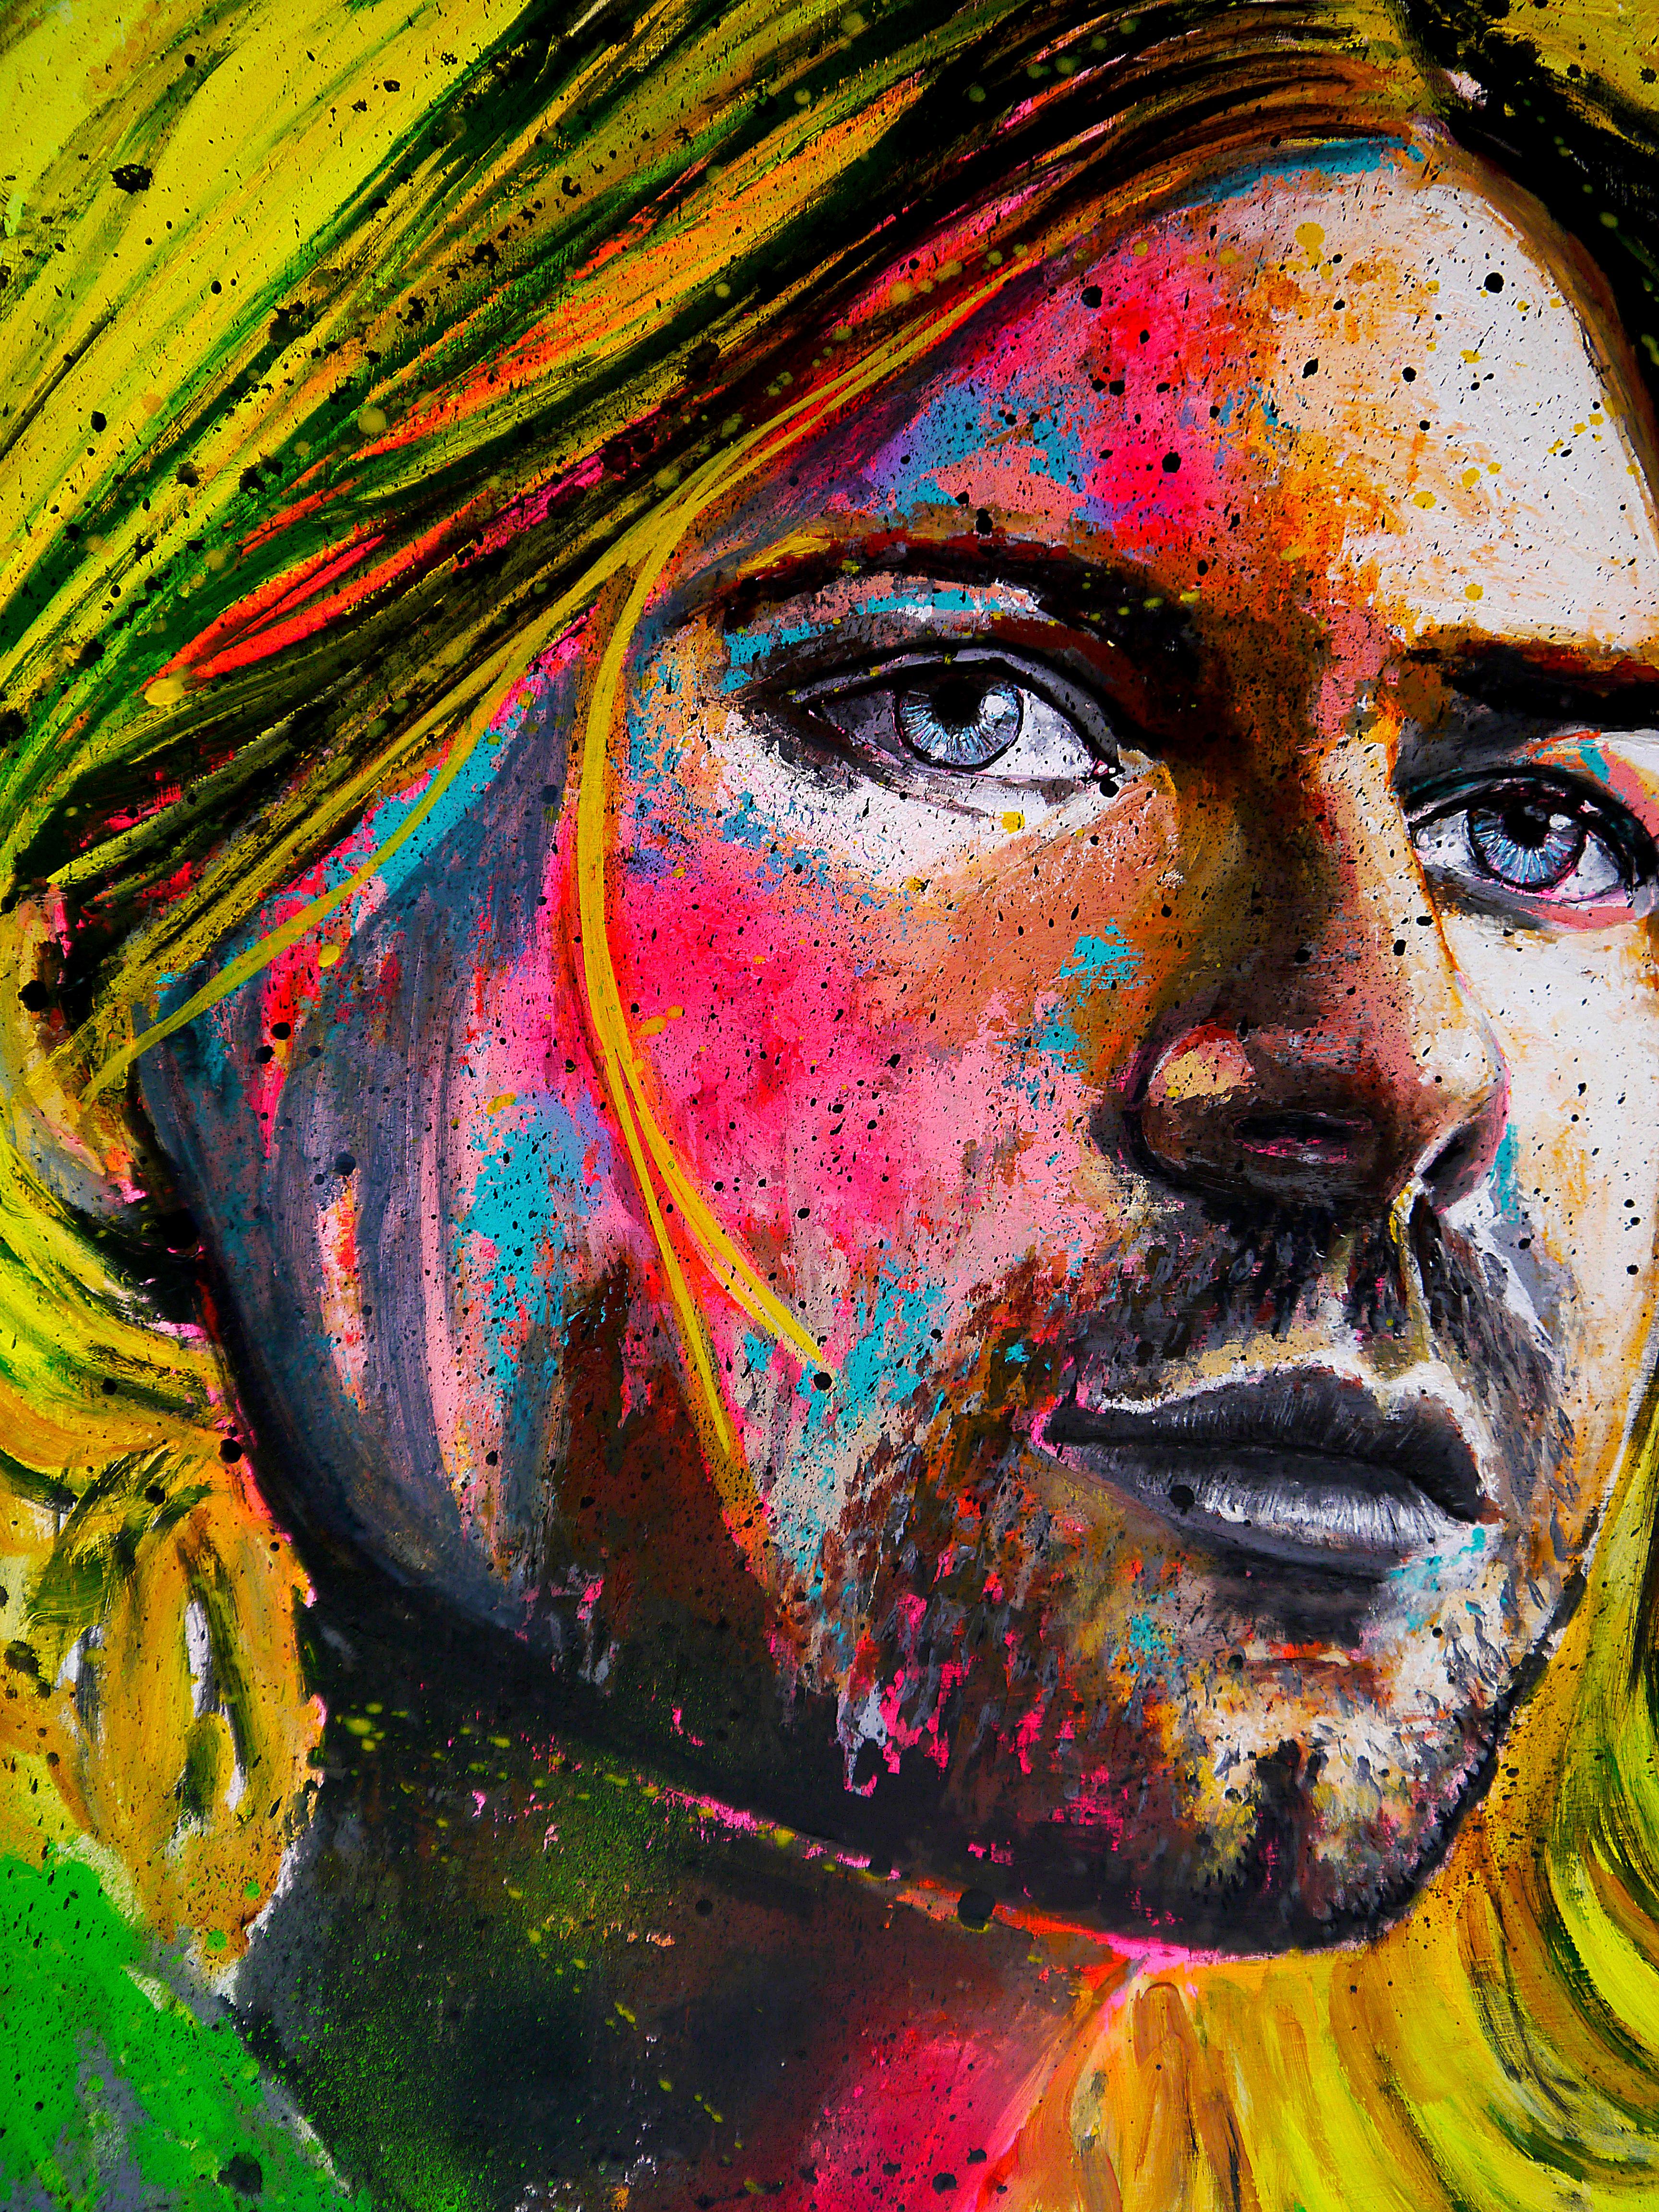 Portrait Kurt Cobain - Nirvana - Grunge

Fluo iconic portrait of Kurt Cobain.

Technique: Acrylics, oil painting, China ink on canvas 80x80cm / 31,5x31,5inch

》》R E A D Y -- T O -- H A N G《《

❶ → Original signed work. Certificate of authenticity